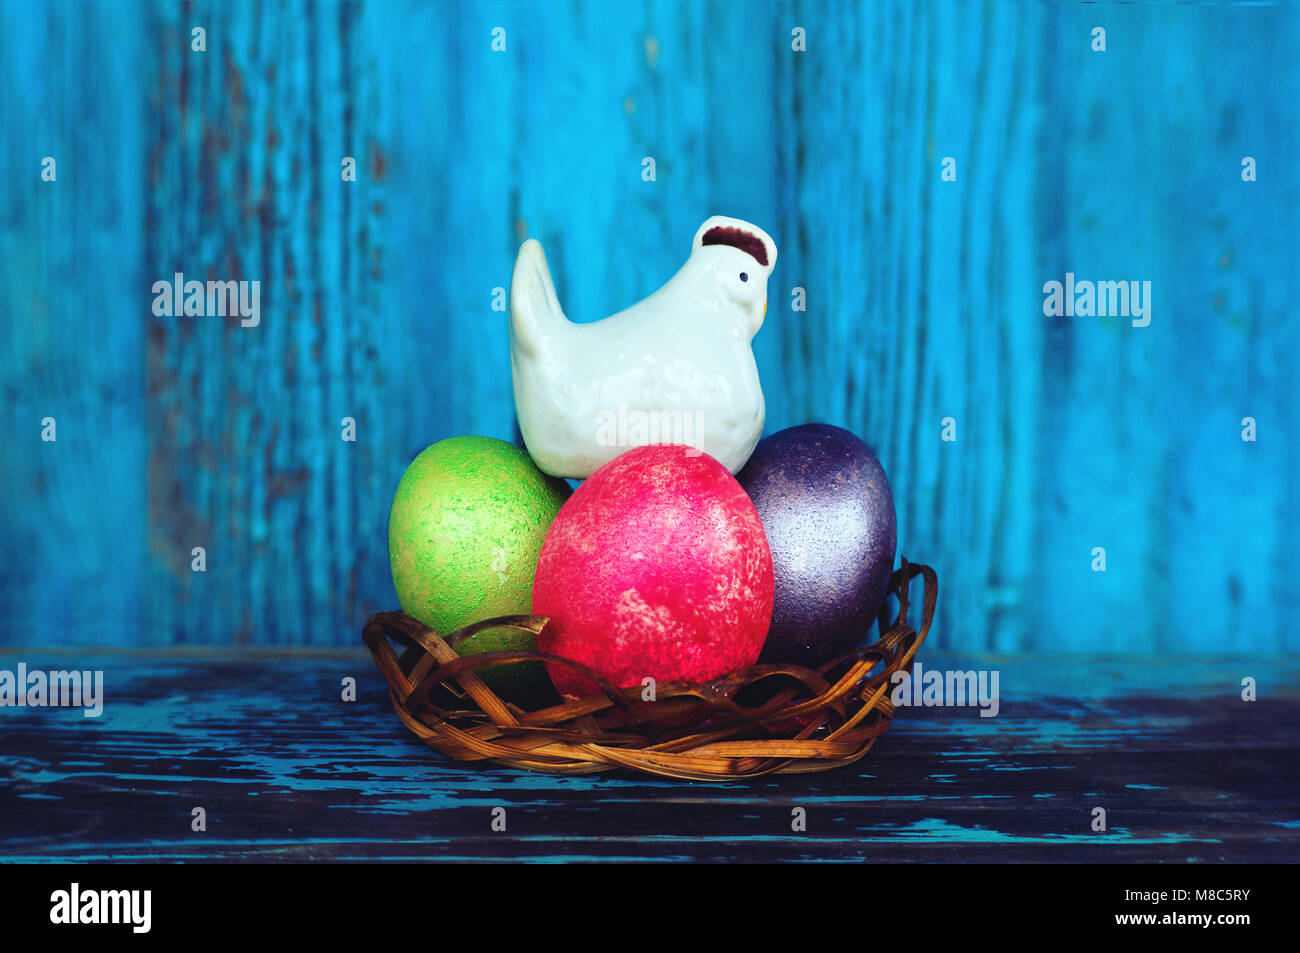 White chicken salt shaker and multicolored painted eggs on vintage wooden background. Easter's decorative ornaments. Background. chicken hen incubates Stock Photo